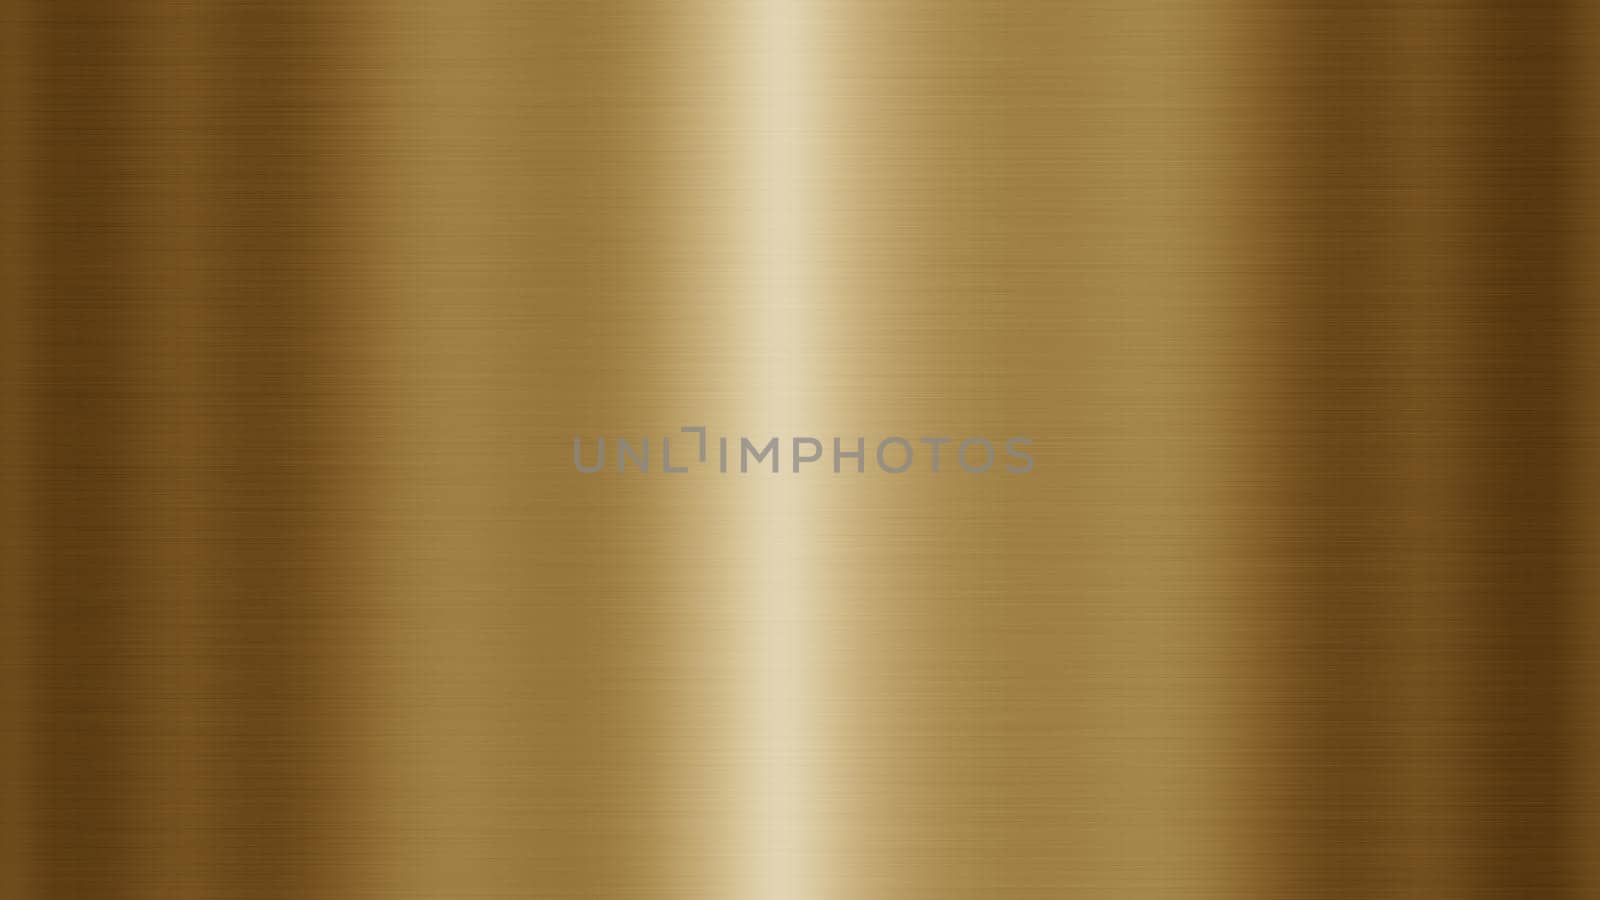 Stainless steel texture metal background